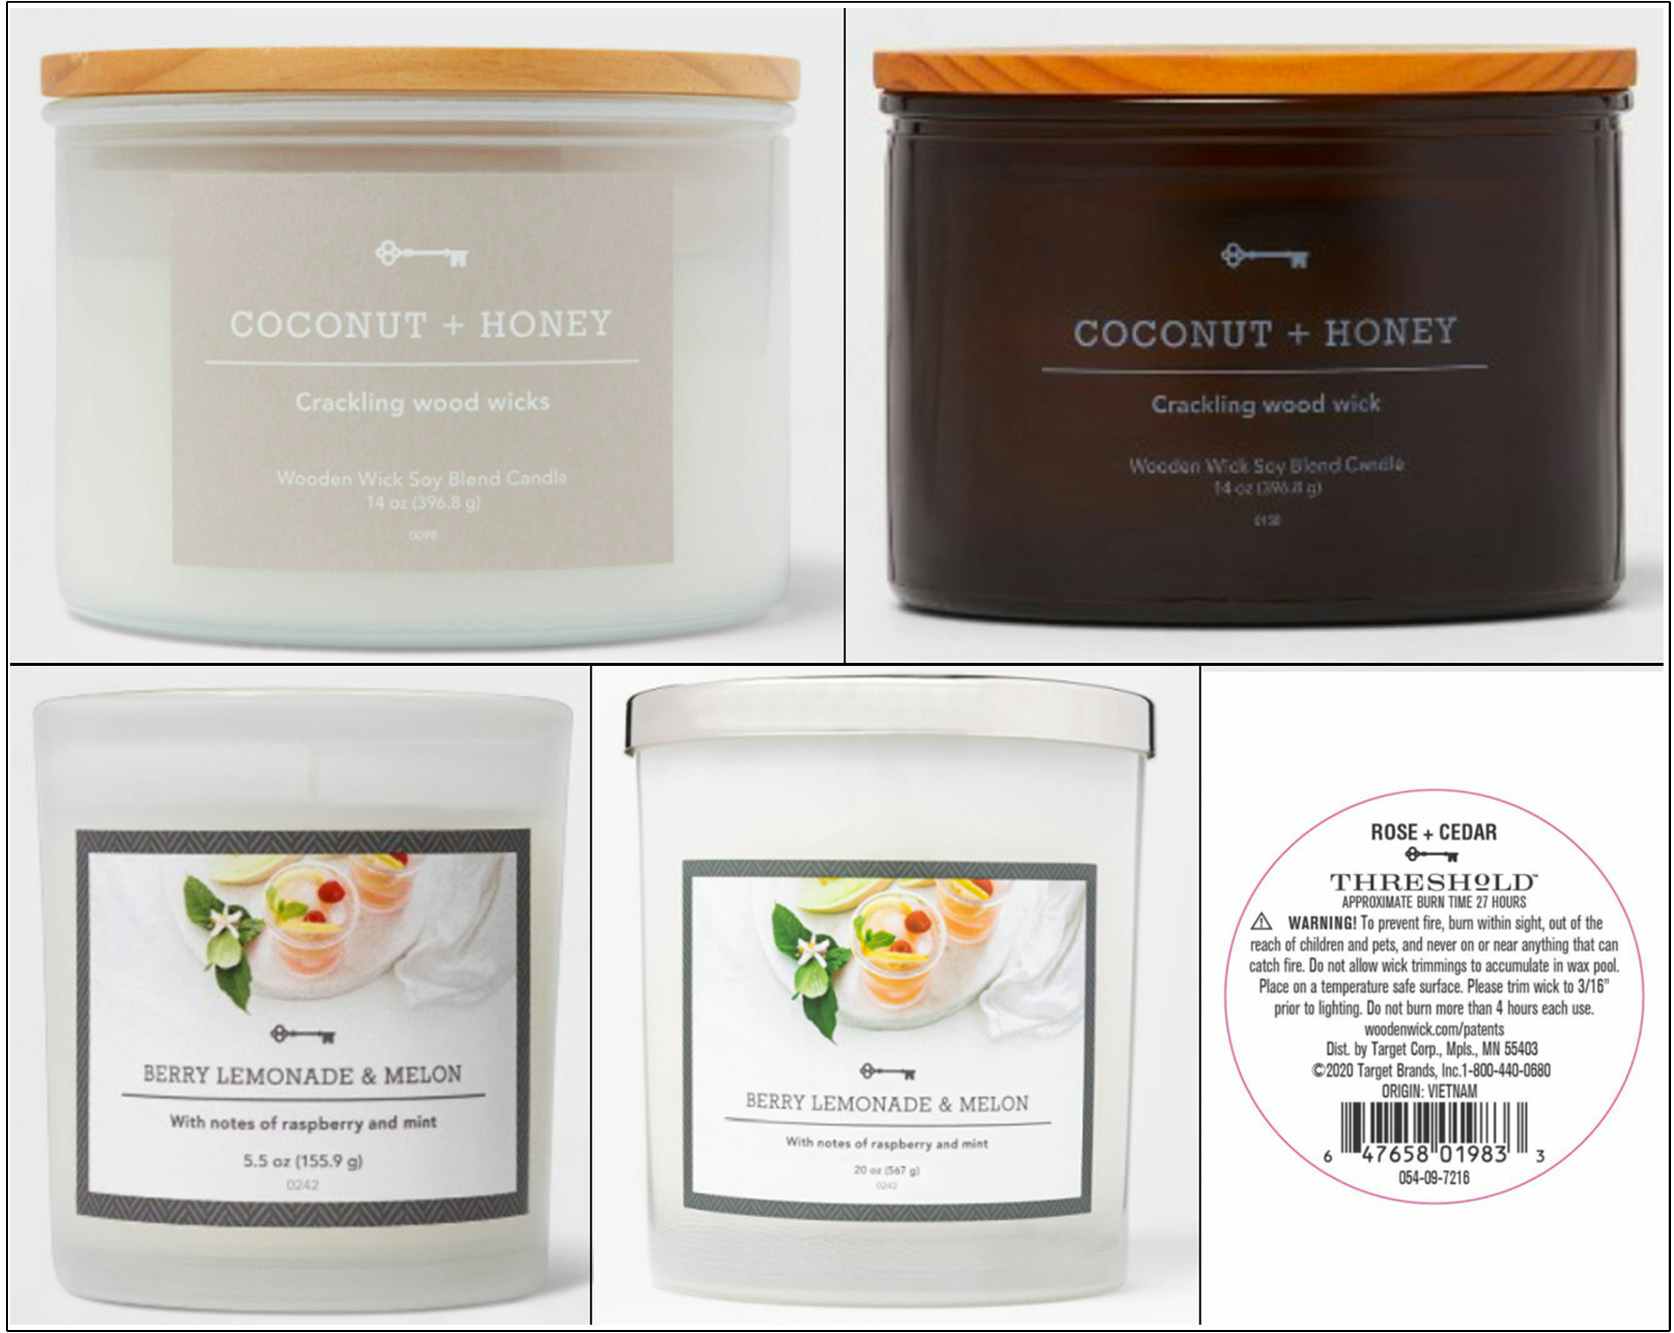 A few examples of the kinds of Threshold candles recalled in the Target candle recall.